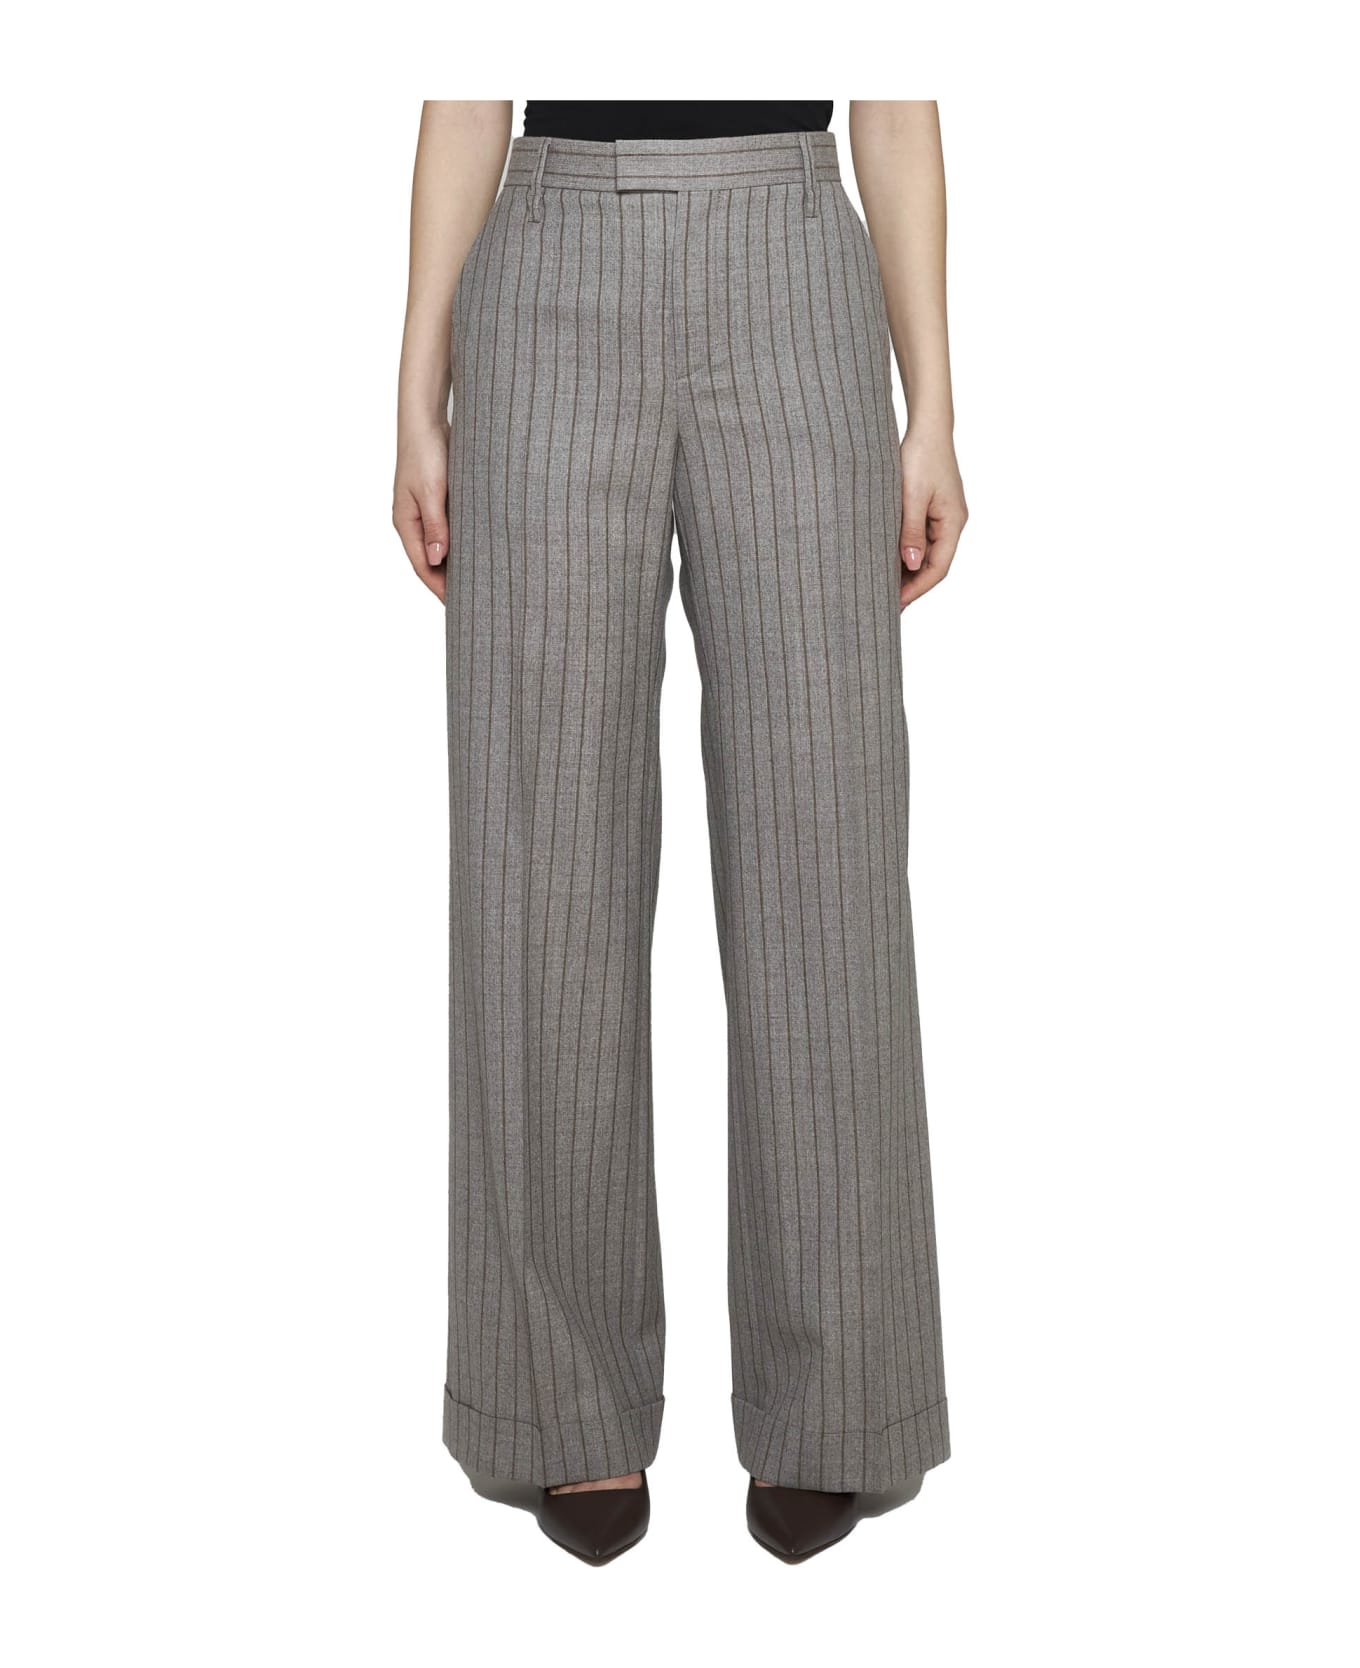 Brunello Cucinelli Pants - Taupe/tabacco